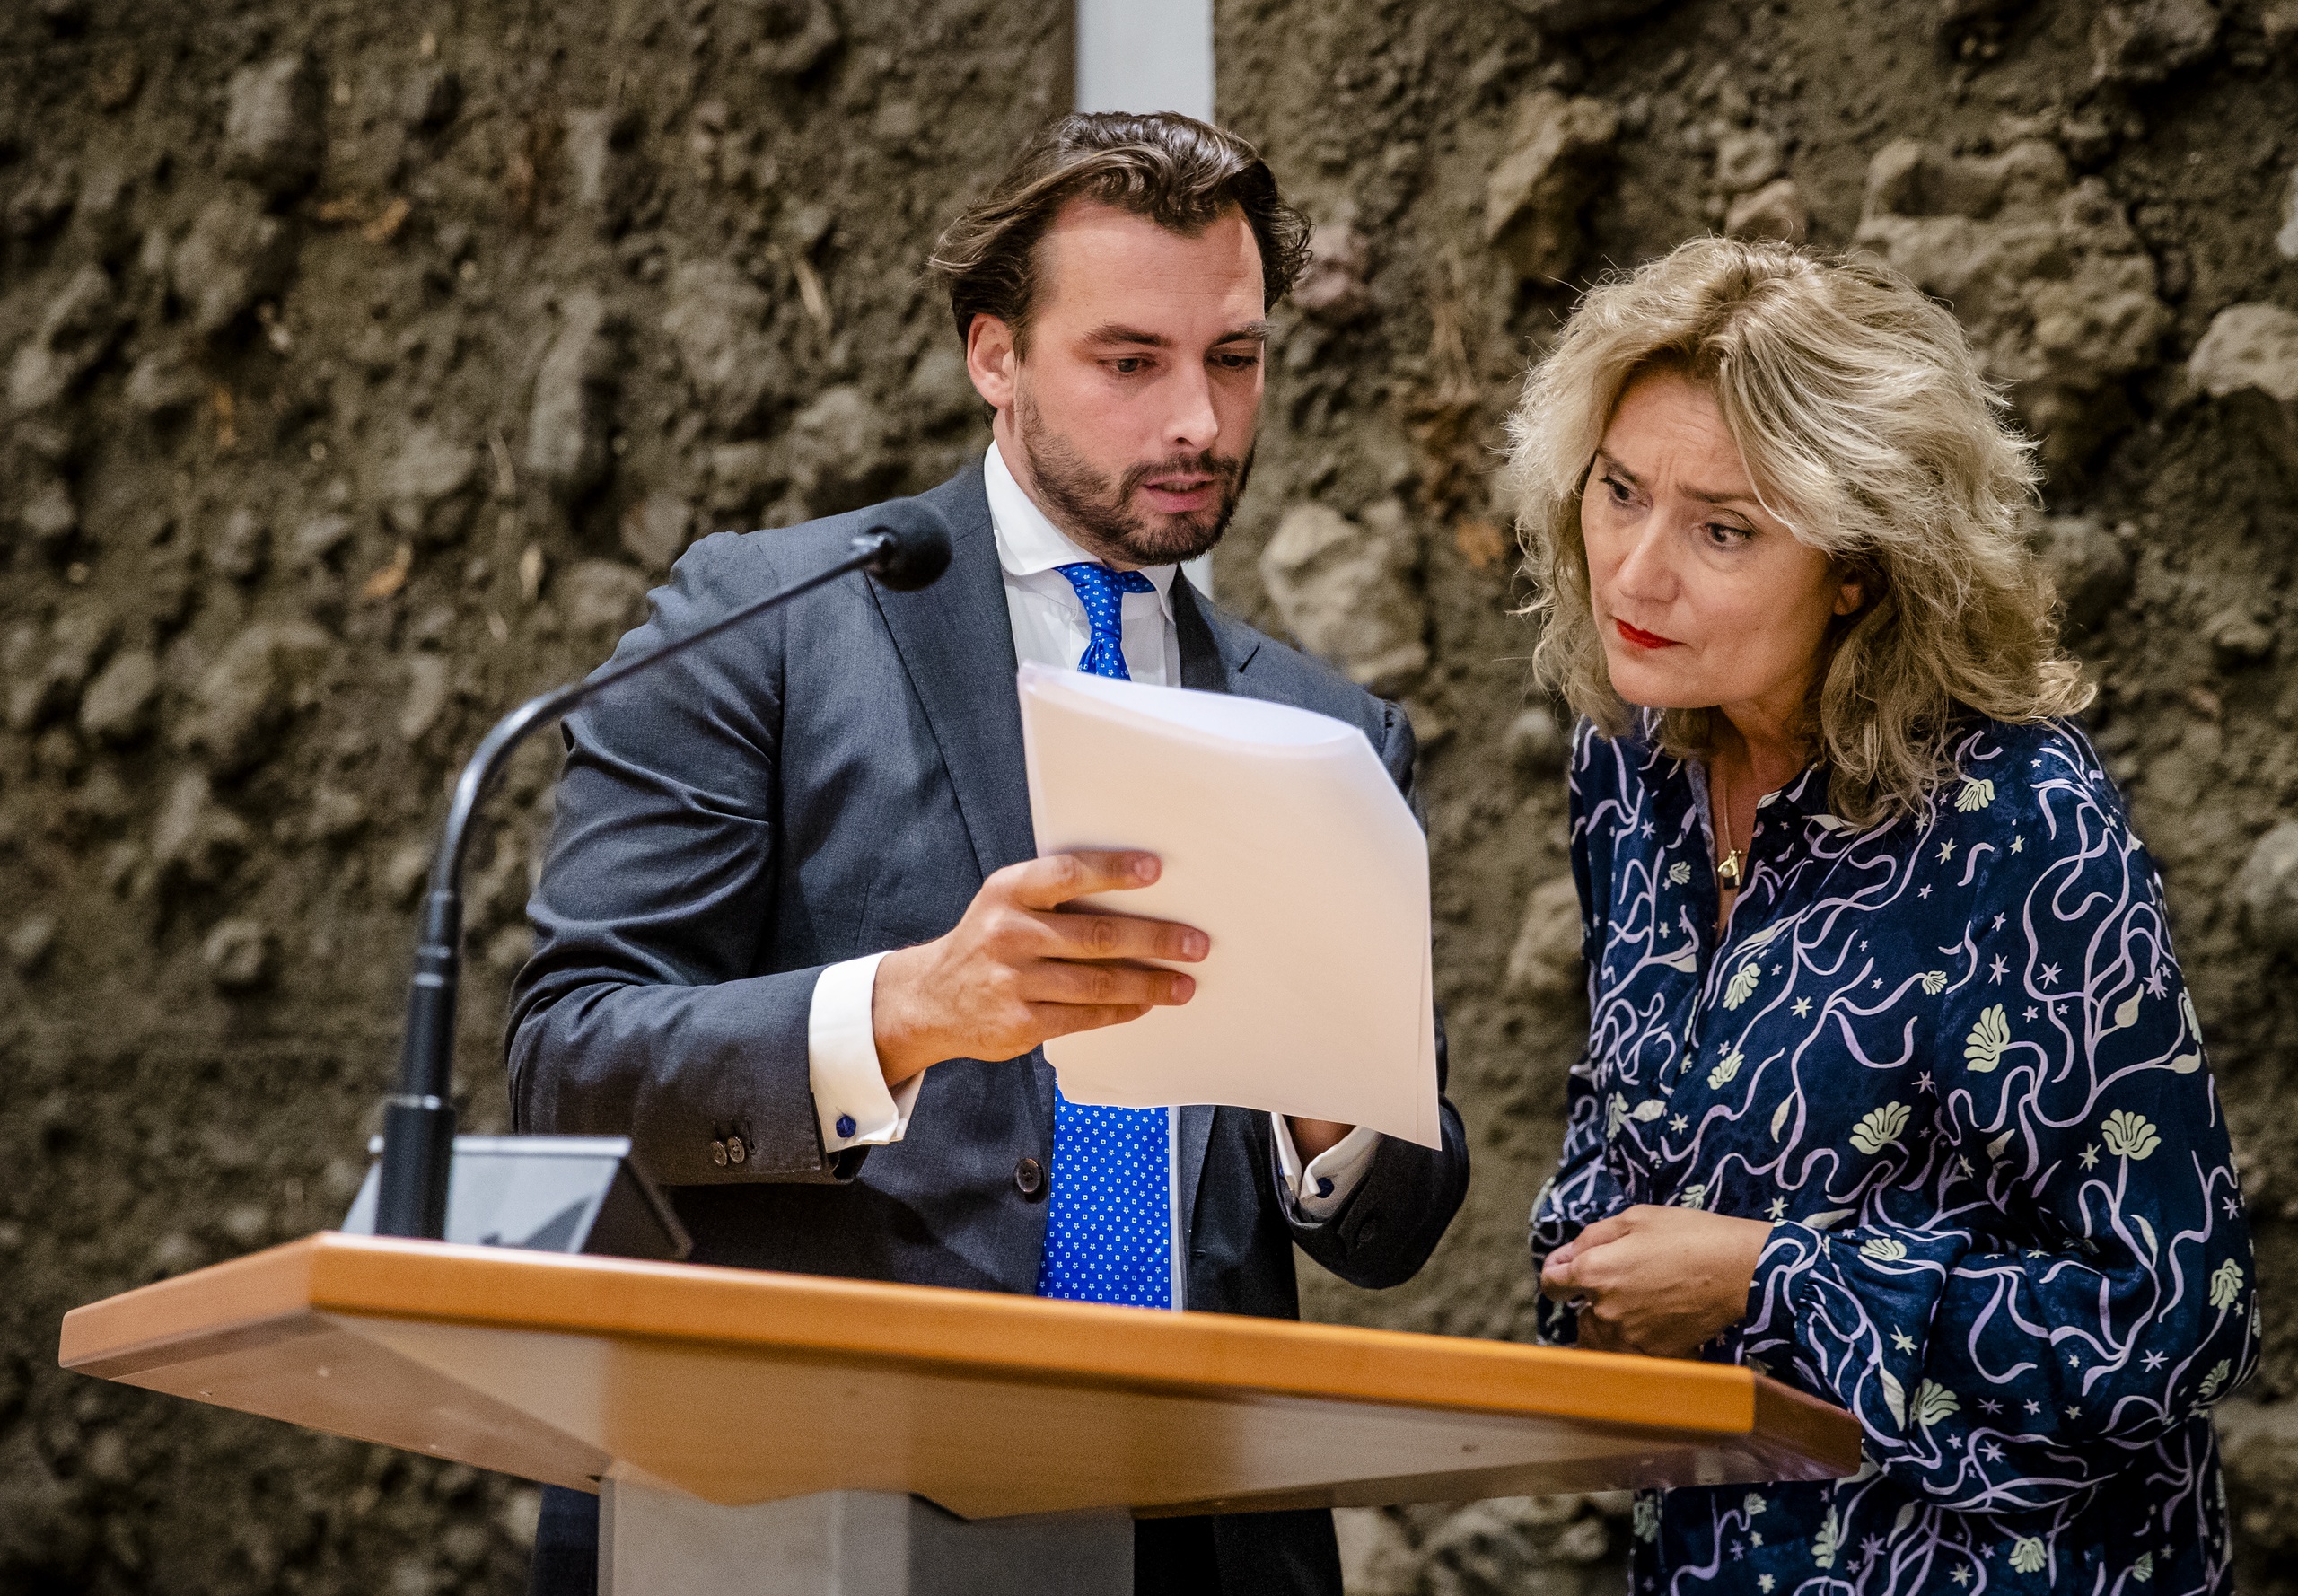 Thierry Baudet (FvD) has his speech read out by chamber president Vera Bergkamp after the entire cabinet left the plenary hall during Baudet's speech, during the first day of the general political reflections, the debate after the throne speech on budget day.  During the debate, the main features of the million dollar budget and the national budget were discussed.